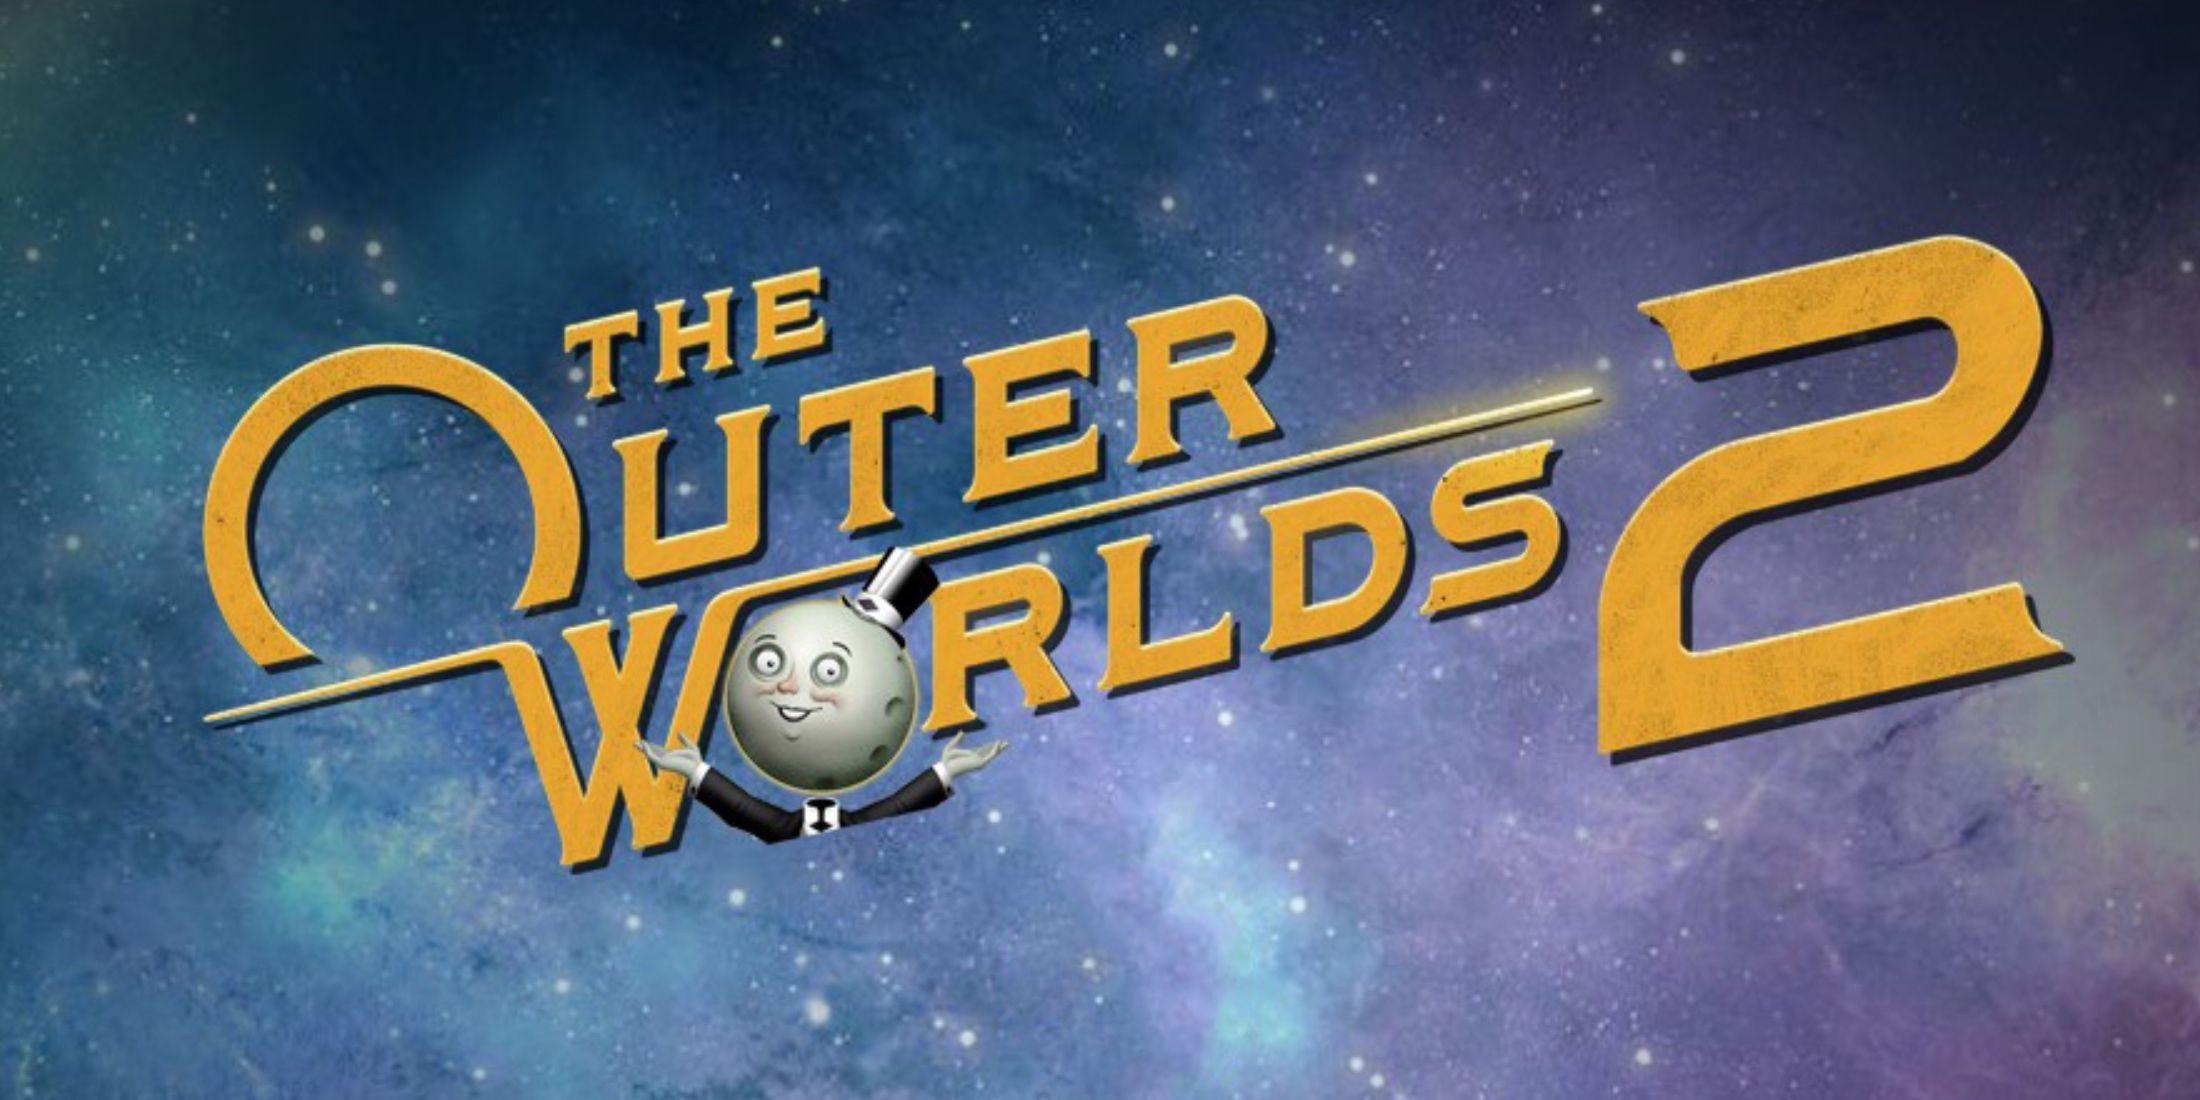 the-outer-worlds-2-moon-man-logo-space-background